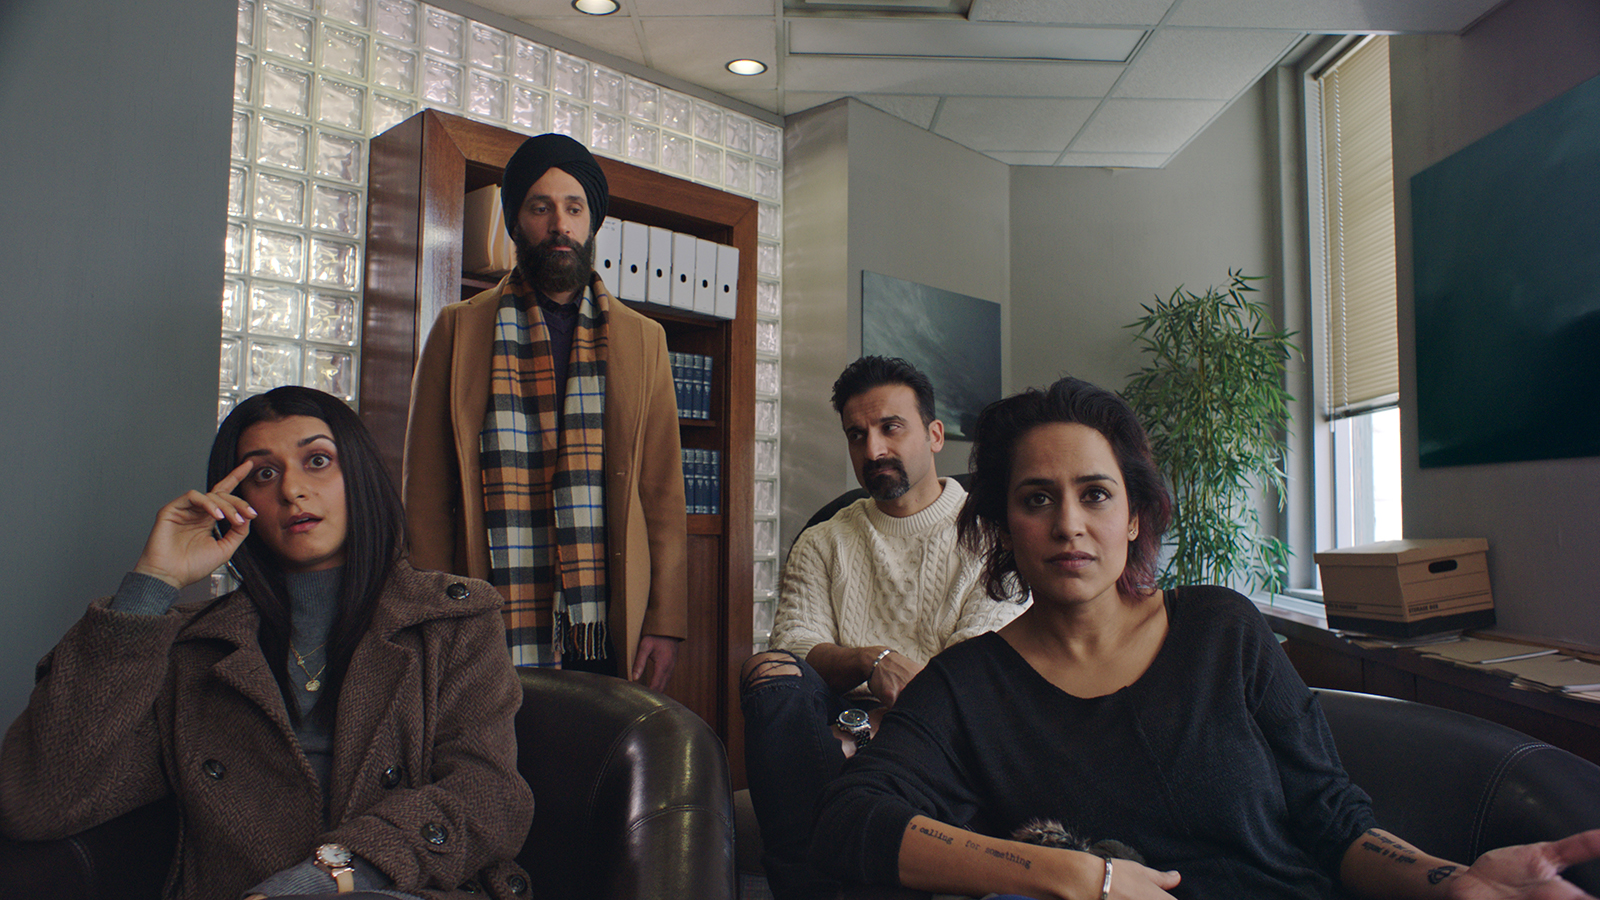 You Can T Talk About That The Art Of Sharing Sikh Experiences On Netflix